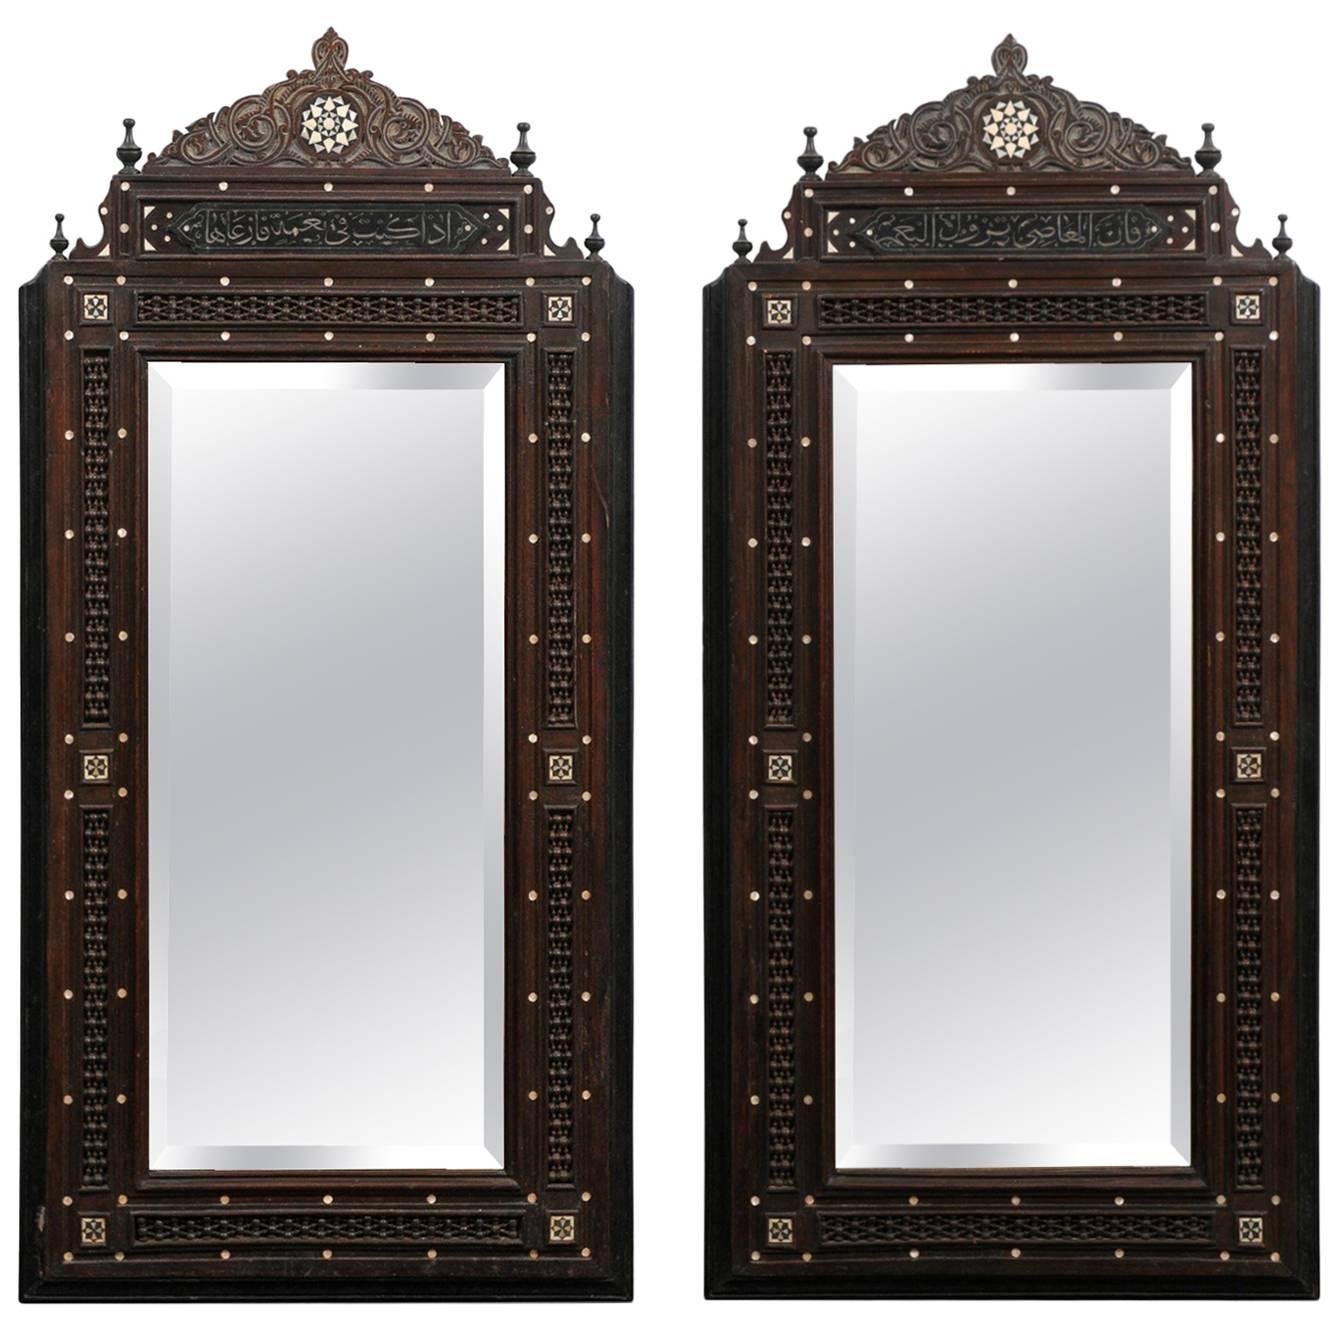 Pair of Syrian Hand-Carved Mirrors with Mother-of-Pearl Inlay, circa 1900